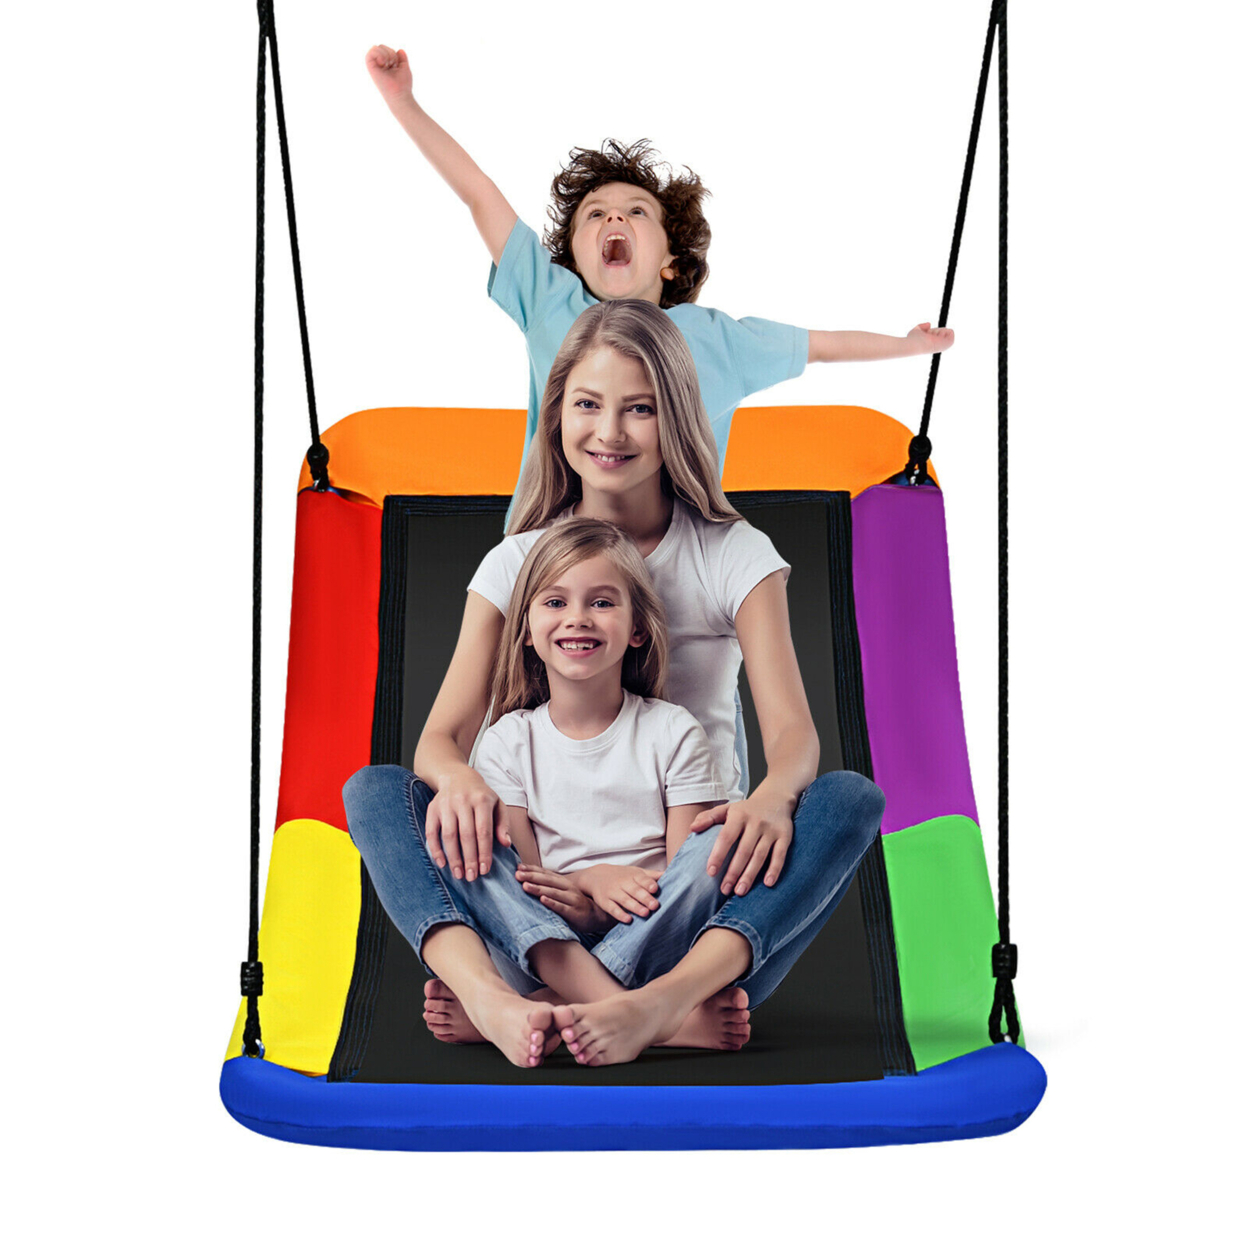 700lb Giant 60'' Platform Tree Swing For Kids And Adults - Multi-Color